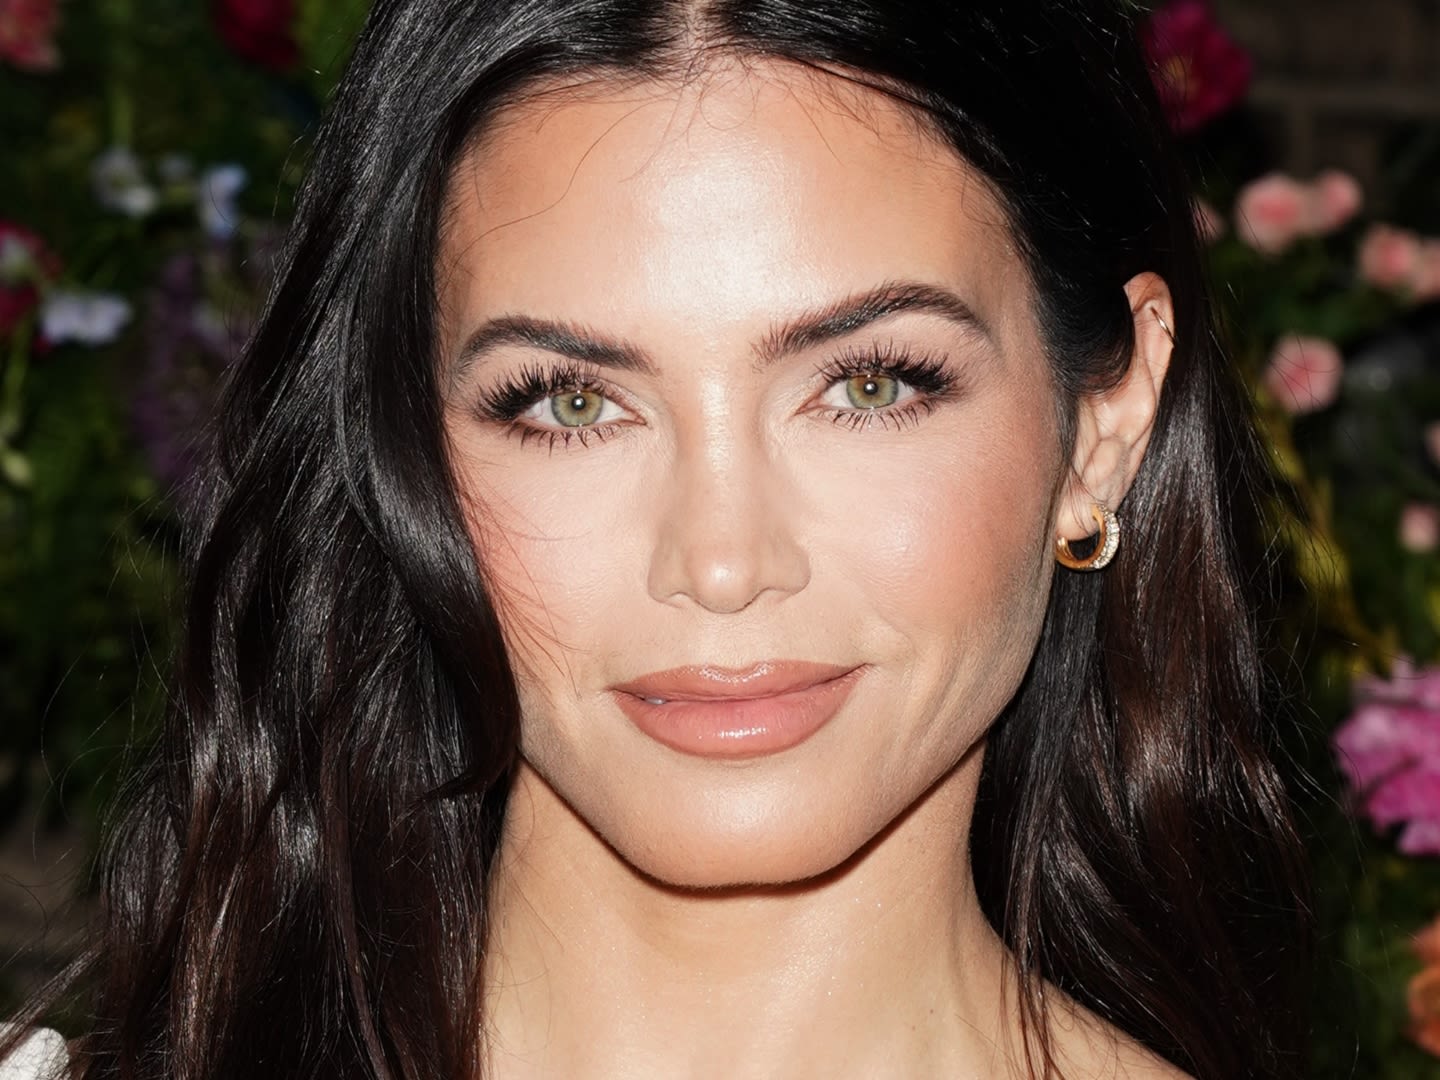 Fans Are Shutting Down Trolls That Are Trying to Shame Jenna Dewan for Her Stripped Down Baby Bump Photo